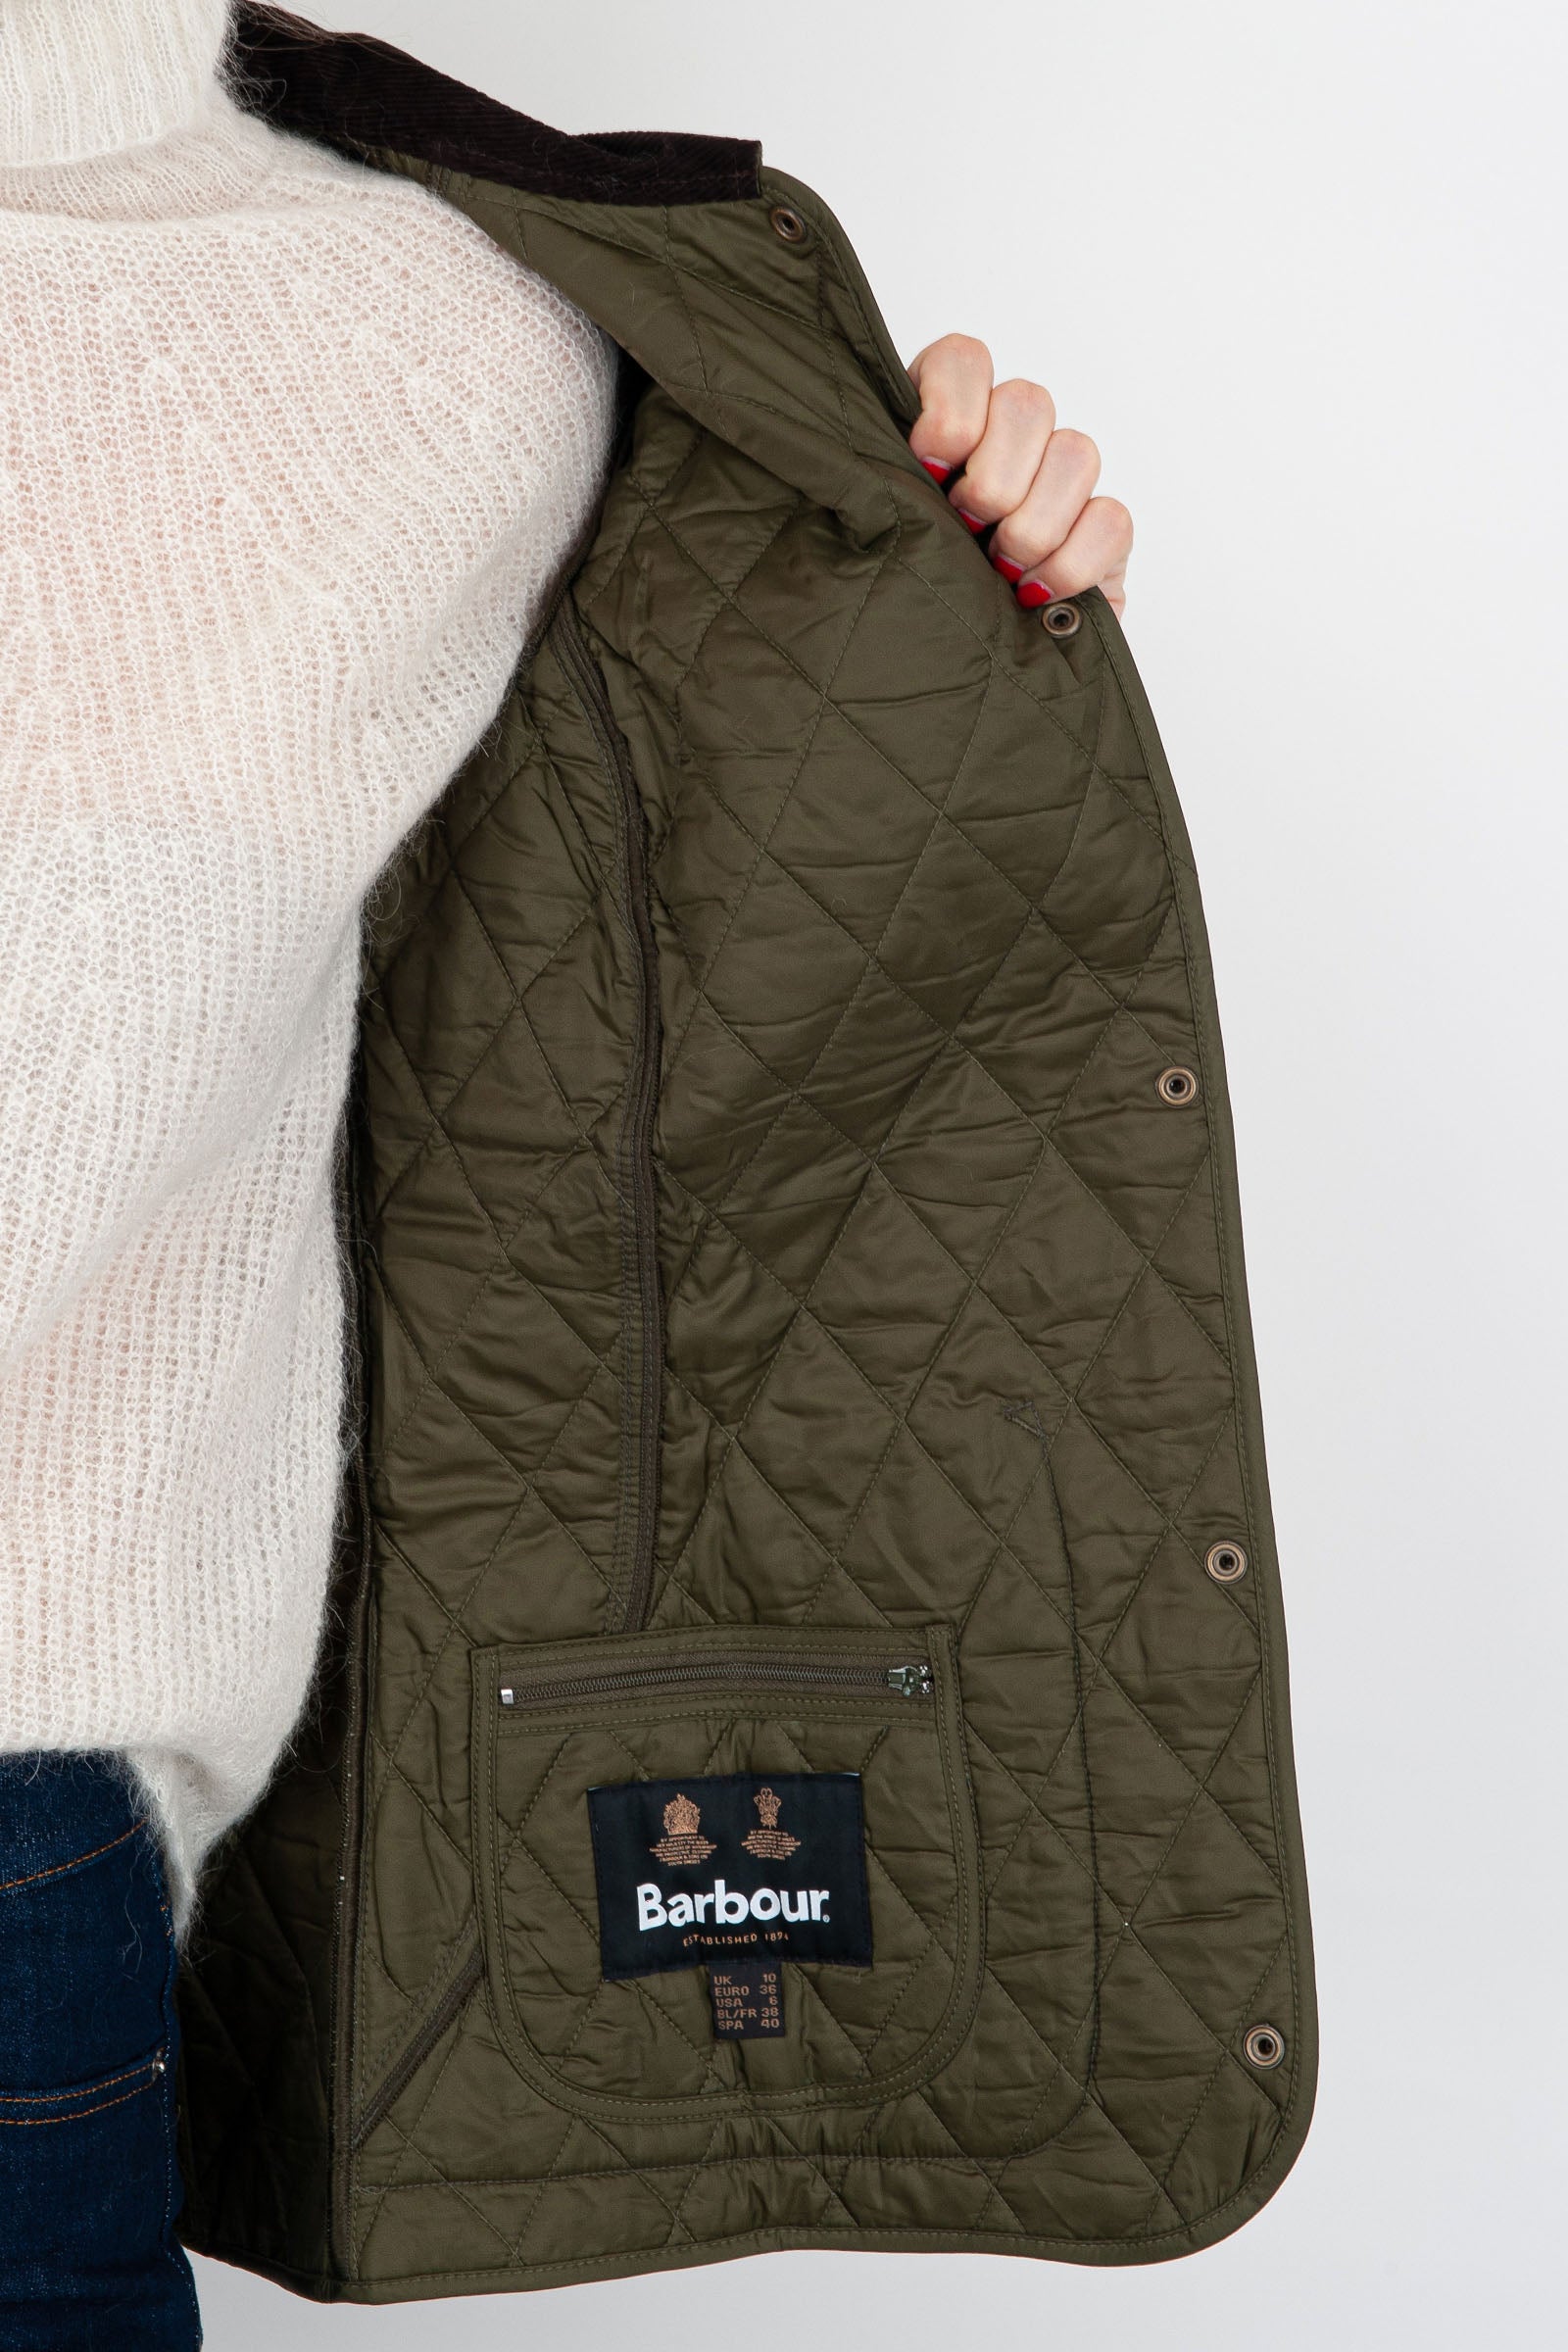 Barbour Giacca Trapuntata Annandale  Verde Oliva - 5